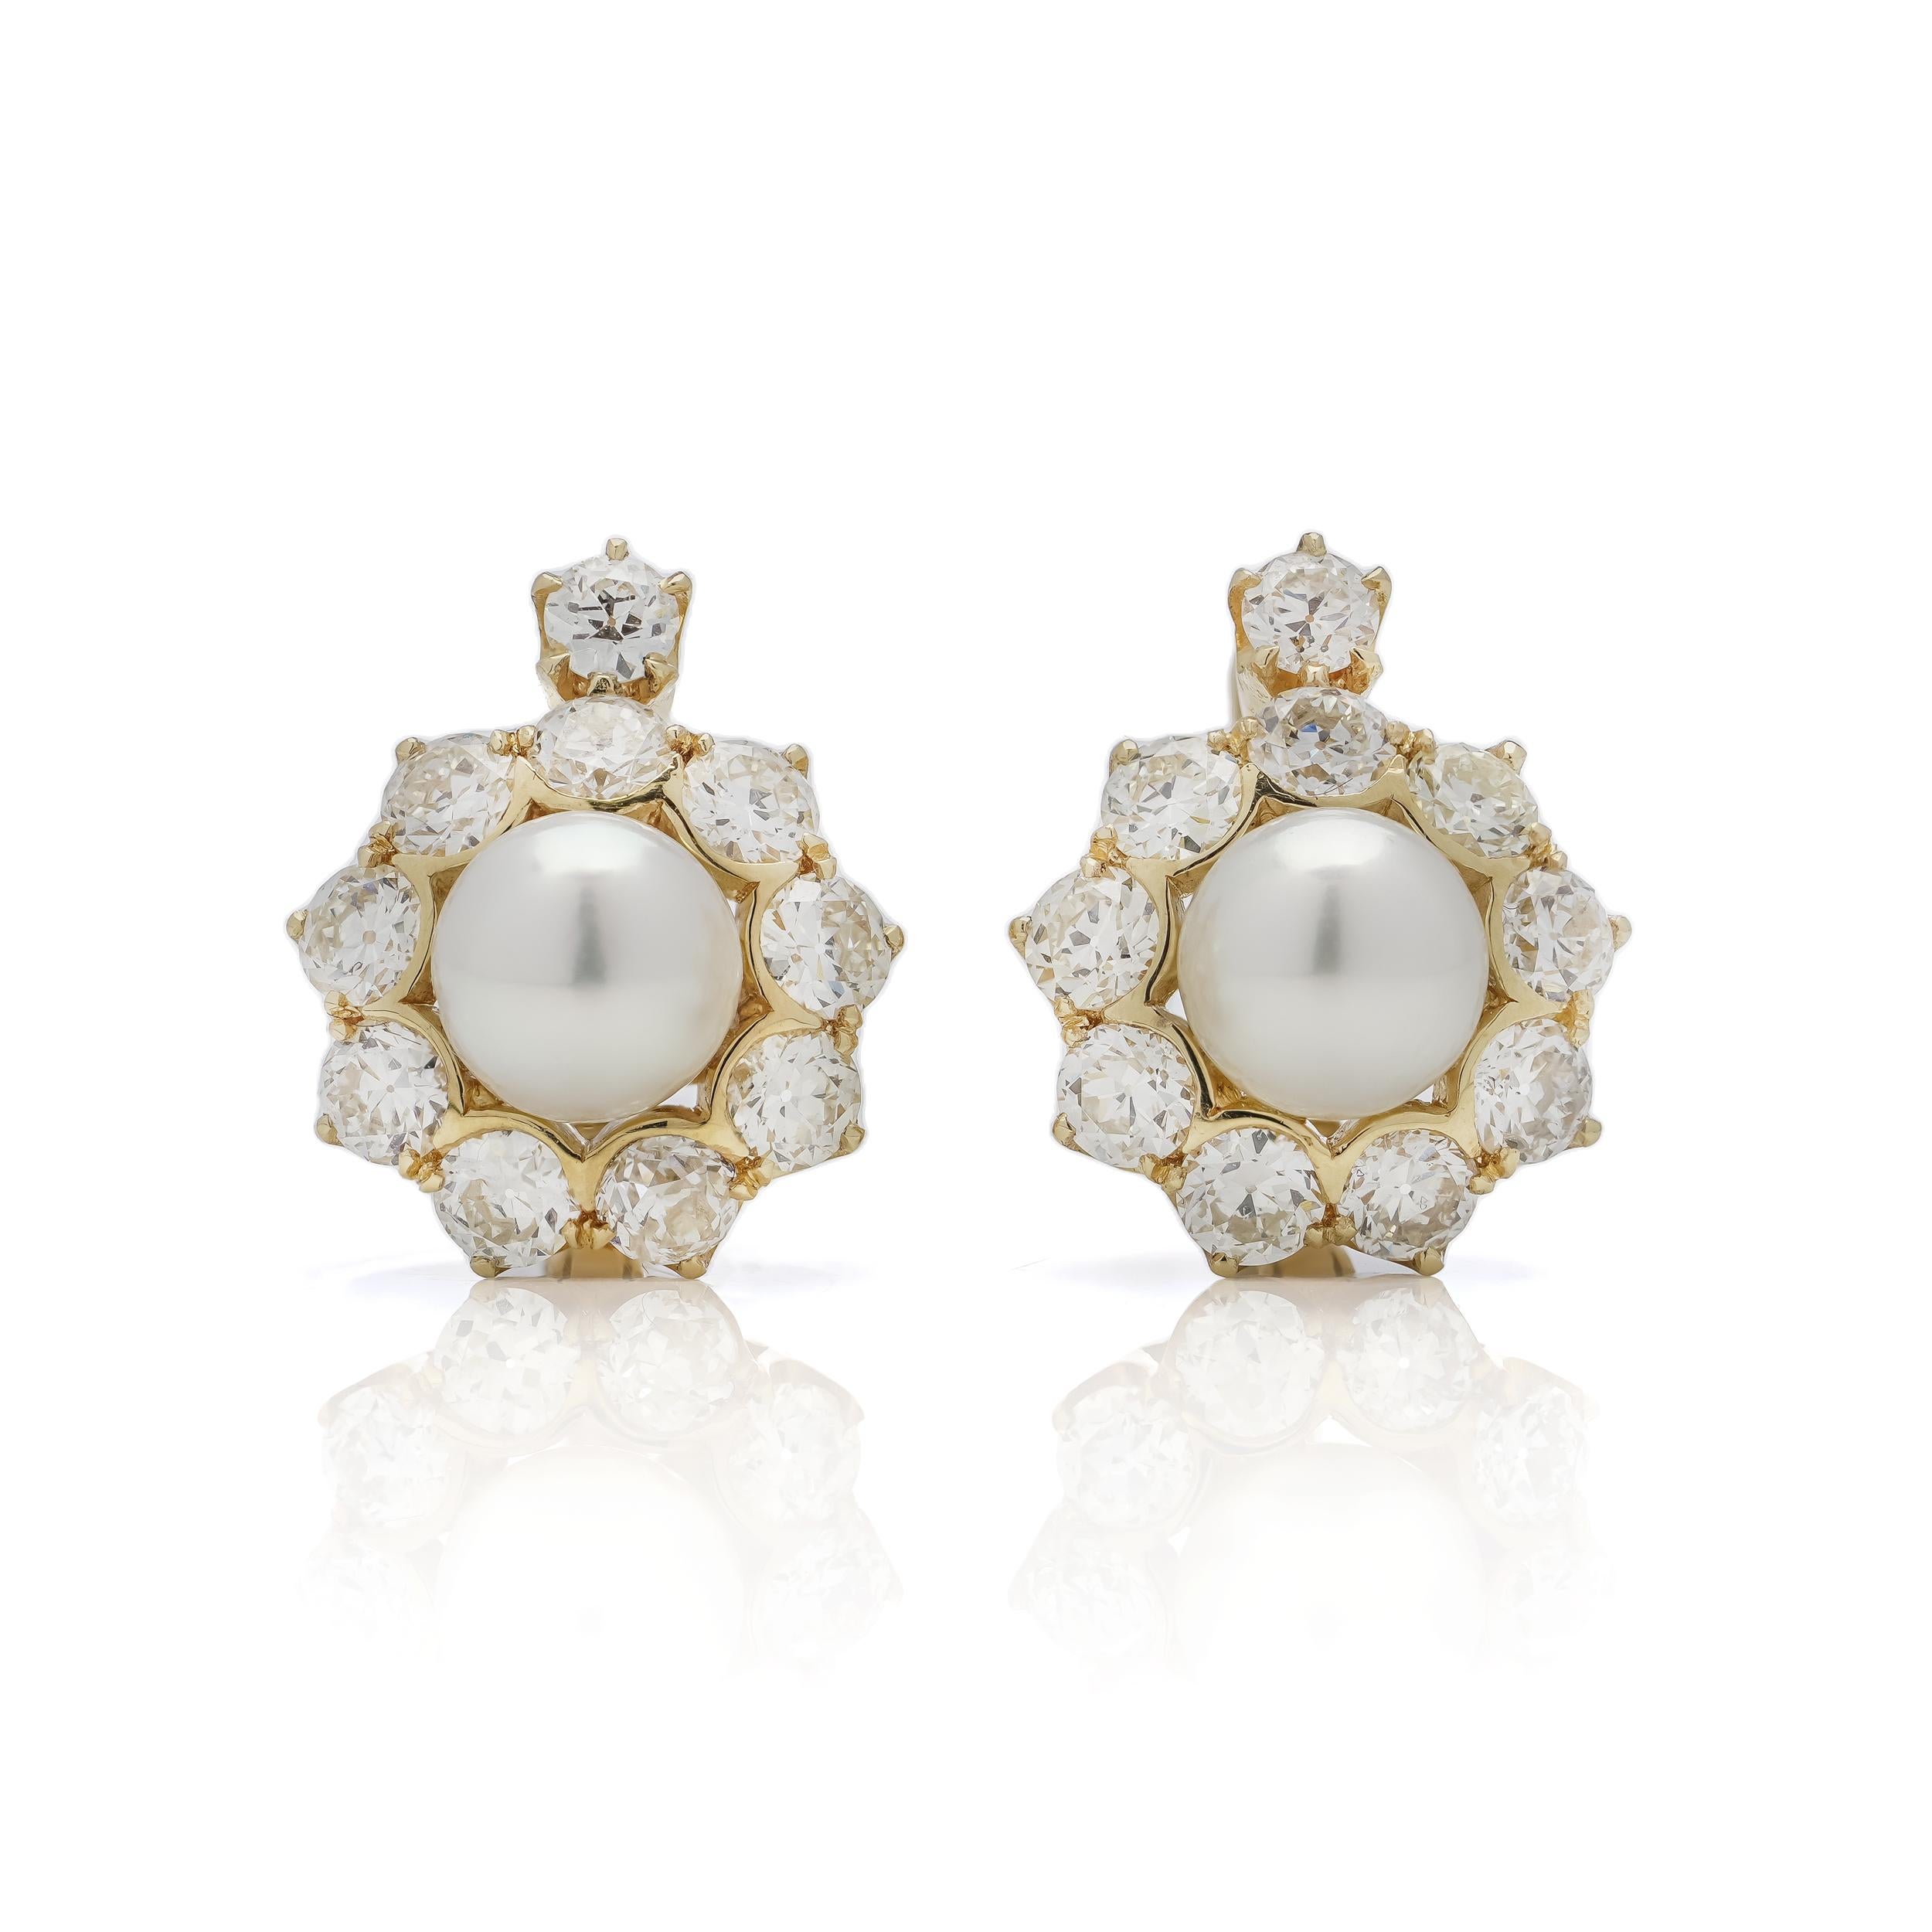 Antique Edwardian 18kt gold clip-on earrings with cultured saltwater pearls and old cut diamonds.
Made in England Circa 1910.
X-Ray Tested positive for 18kt gold.

Dimensions - 
Weight: 5.55 grams
Size: 2.5 x 1.2 x 1.7 cm

Saltwater Pearls -